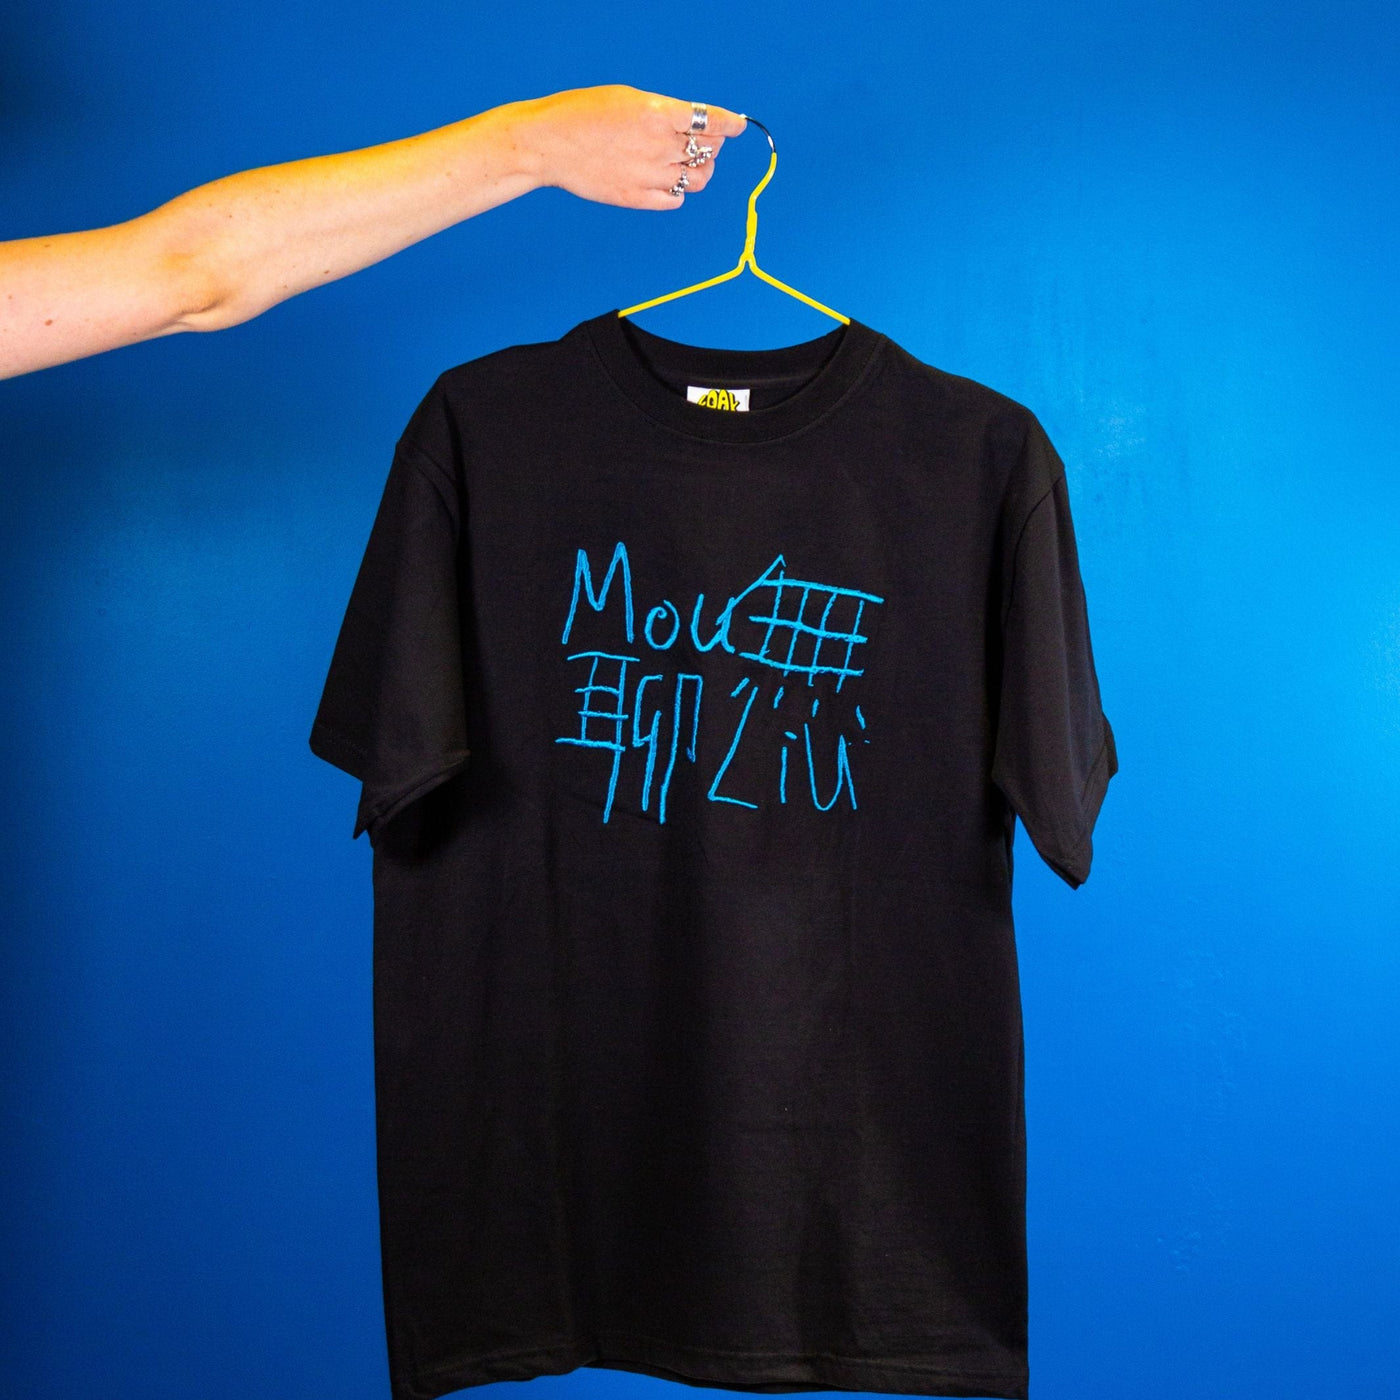 Embroidered T-shirt: Fool of a Kind - Black/Teal